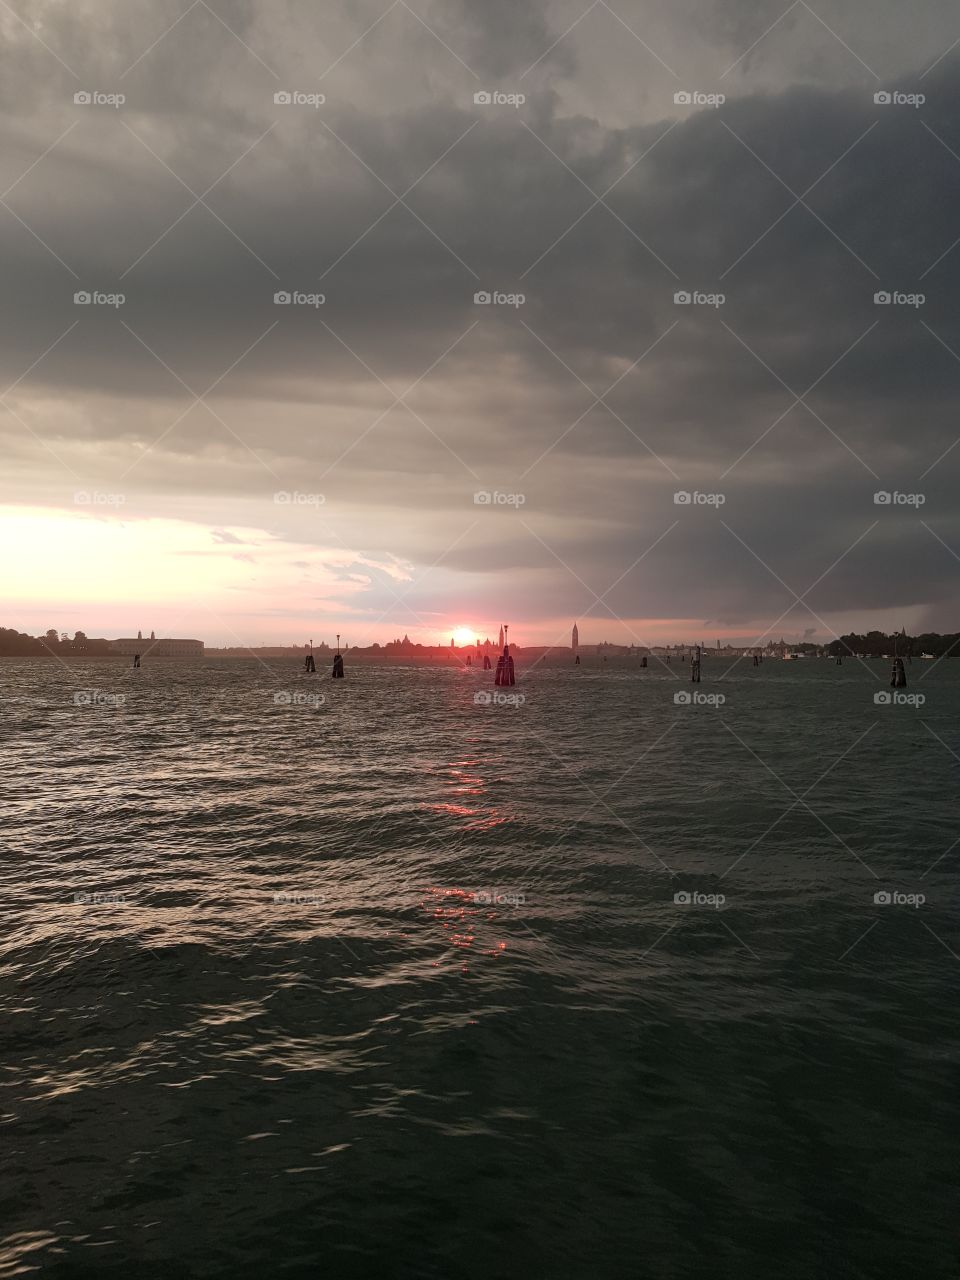 the beautiful sunset in Venice, very romantic and passionate, the city of love, perfect for valentines day and for couoles who fall in love. this is Venezia!